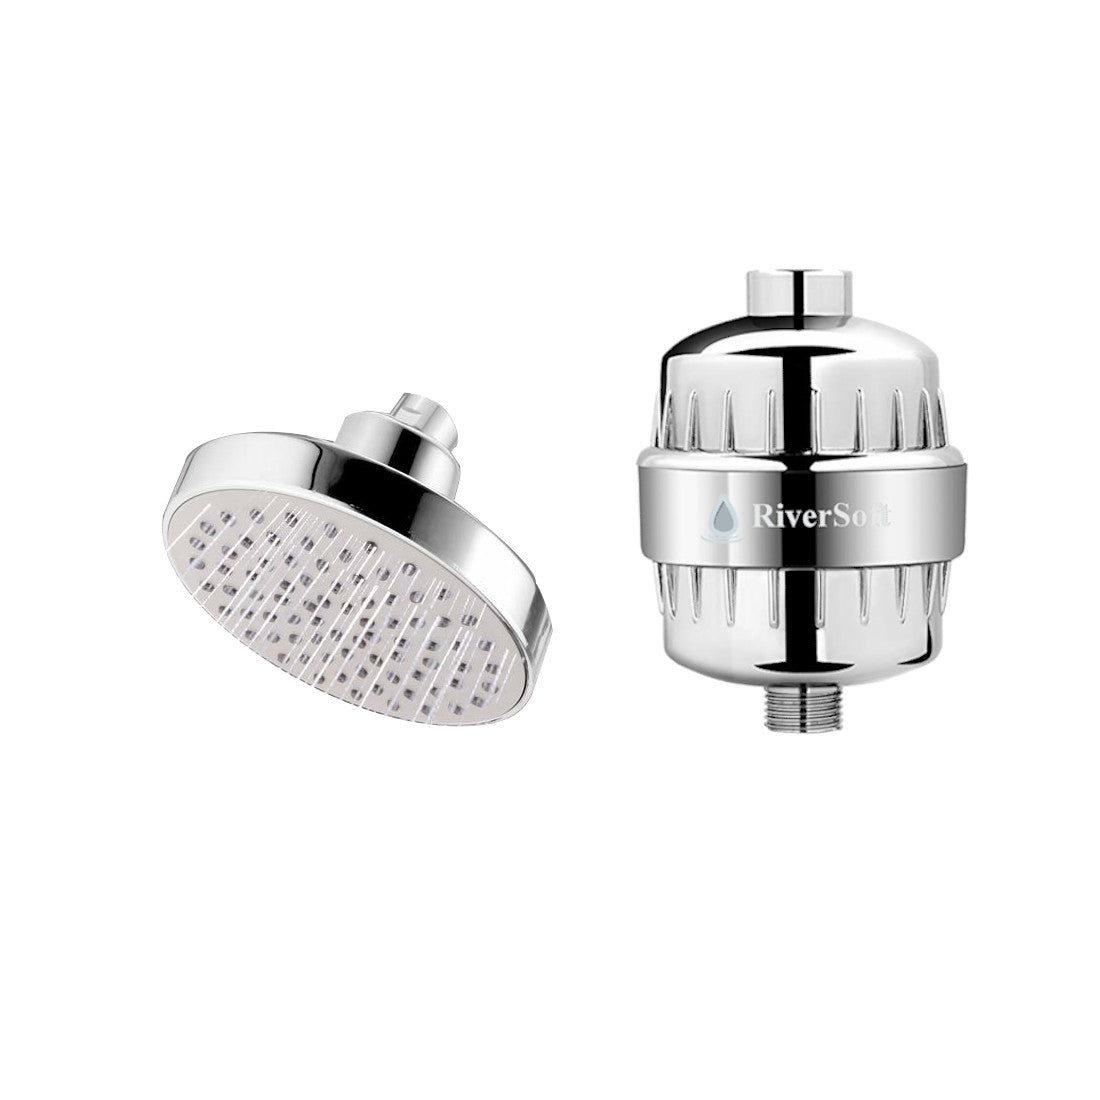 Shower head with shower filter for hard water with 15 stages